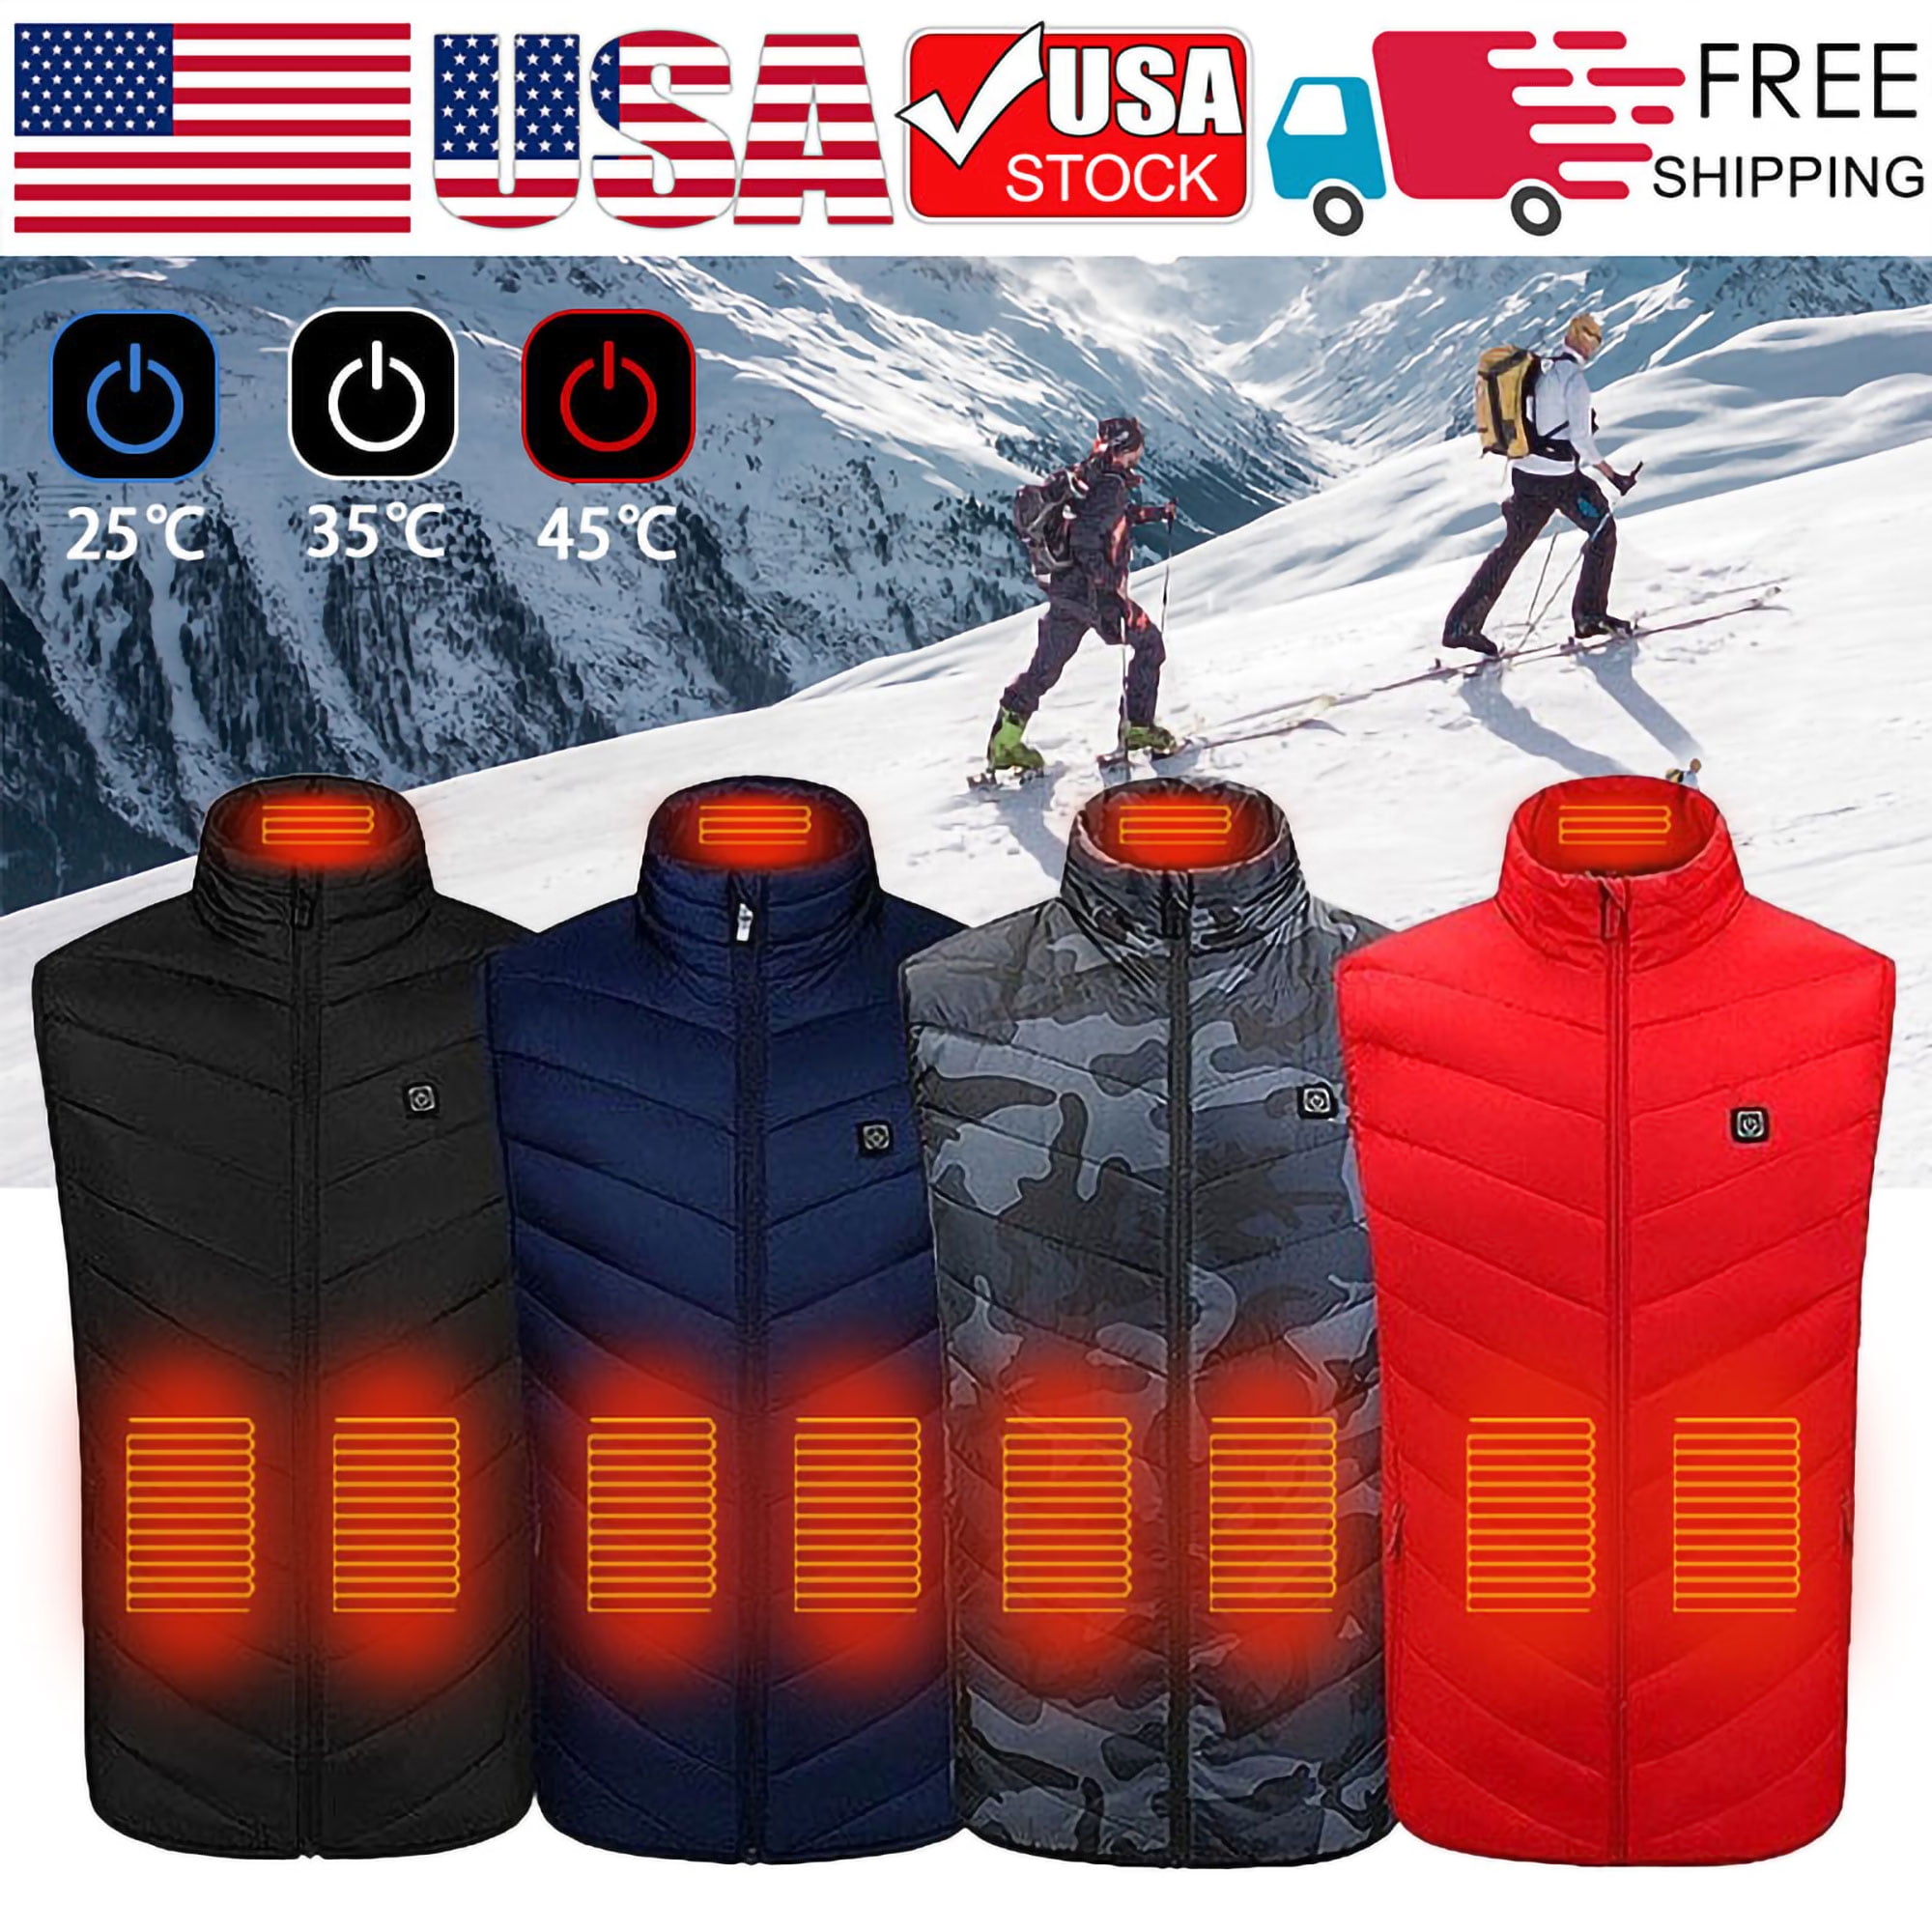 Winter Outdoor Camping Skiing Fishing Hiking Jacket DALADA Heated Vest USB Heating Vest Electric Heated Clothes Lightweight Body Warmer Washable Warming Gilet with 3 Temperature and 3 Heating Zones